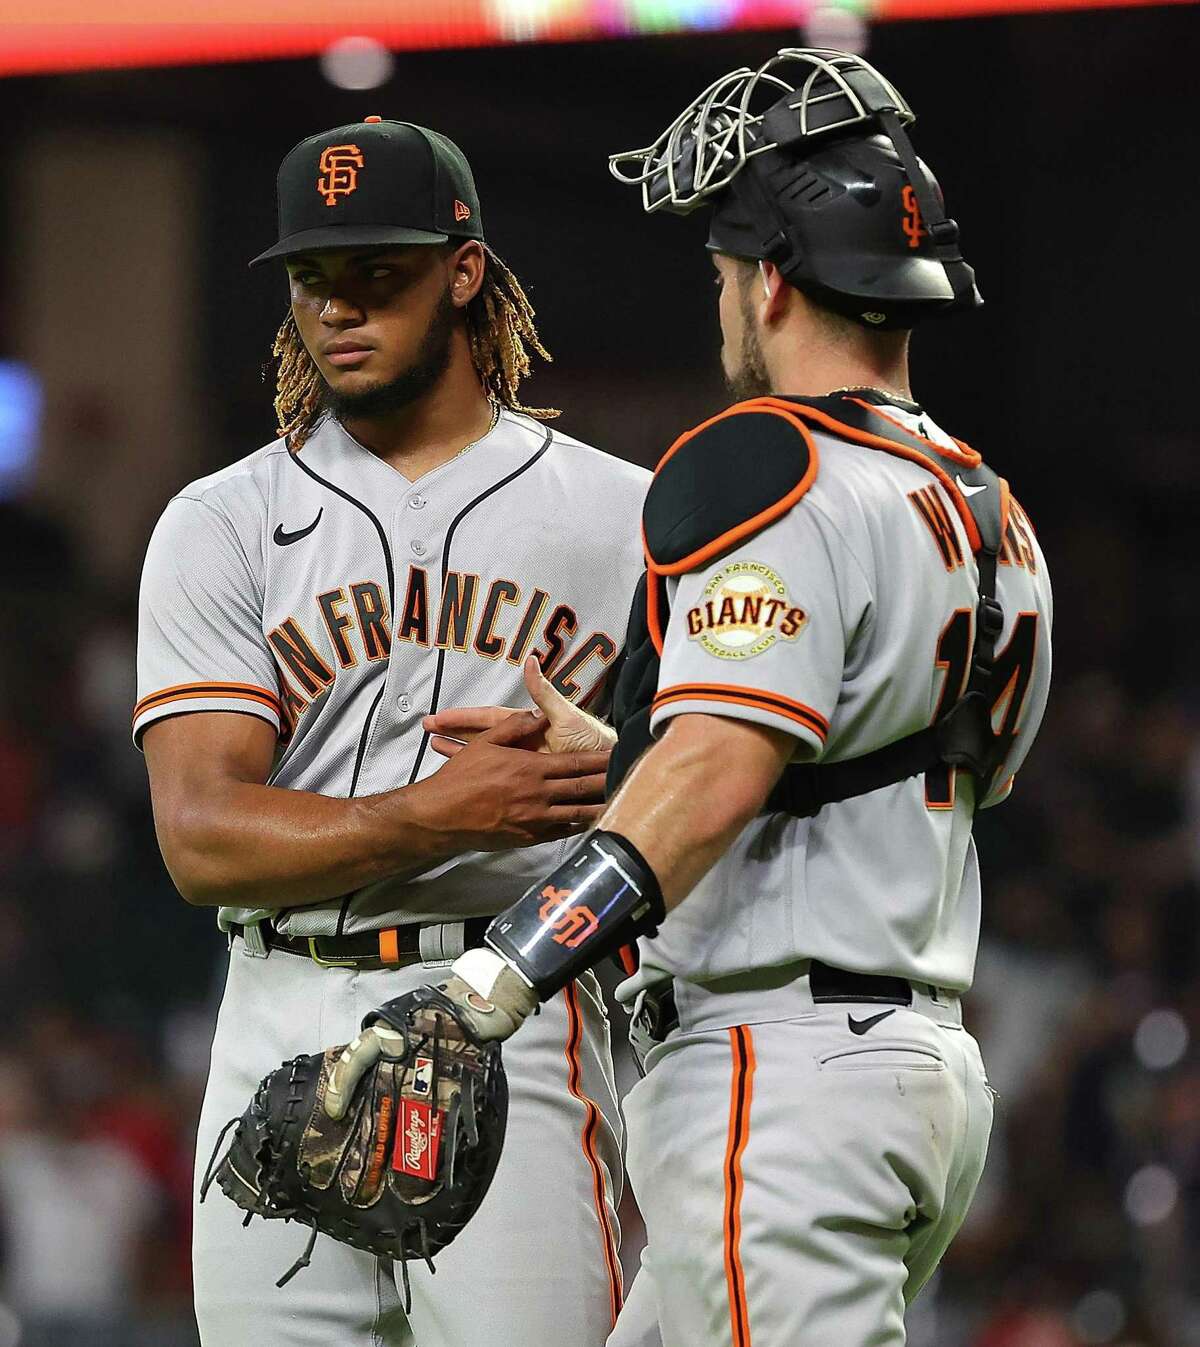 ATLANTA, GEORGIA - JUNE 21: Camilo Doval #75 and Austin Wynns #14 of the San Francisco Giants react after their 12-10 win over the Atlanta Braves at Truist Park on June 21, 2022 in Atlanta, Georgia. (Photo by Kevin C. Cox/Getty Images)